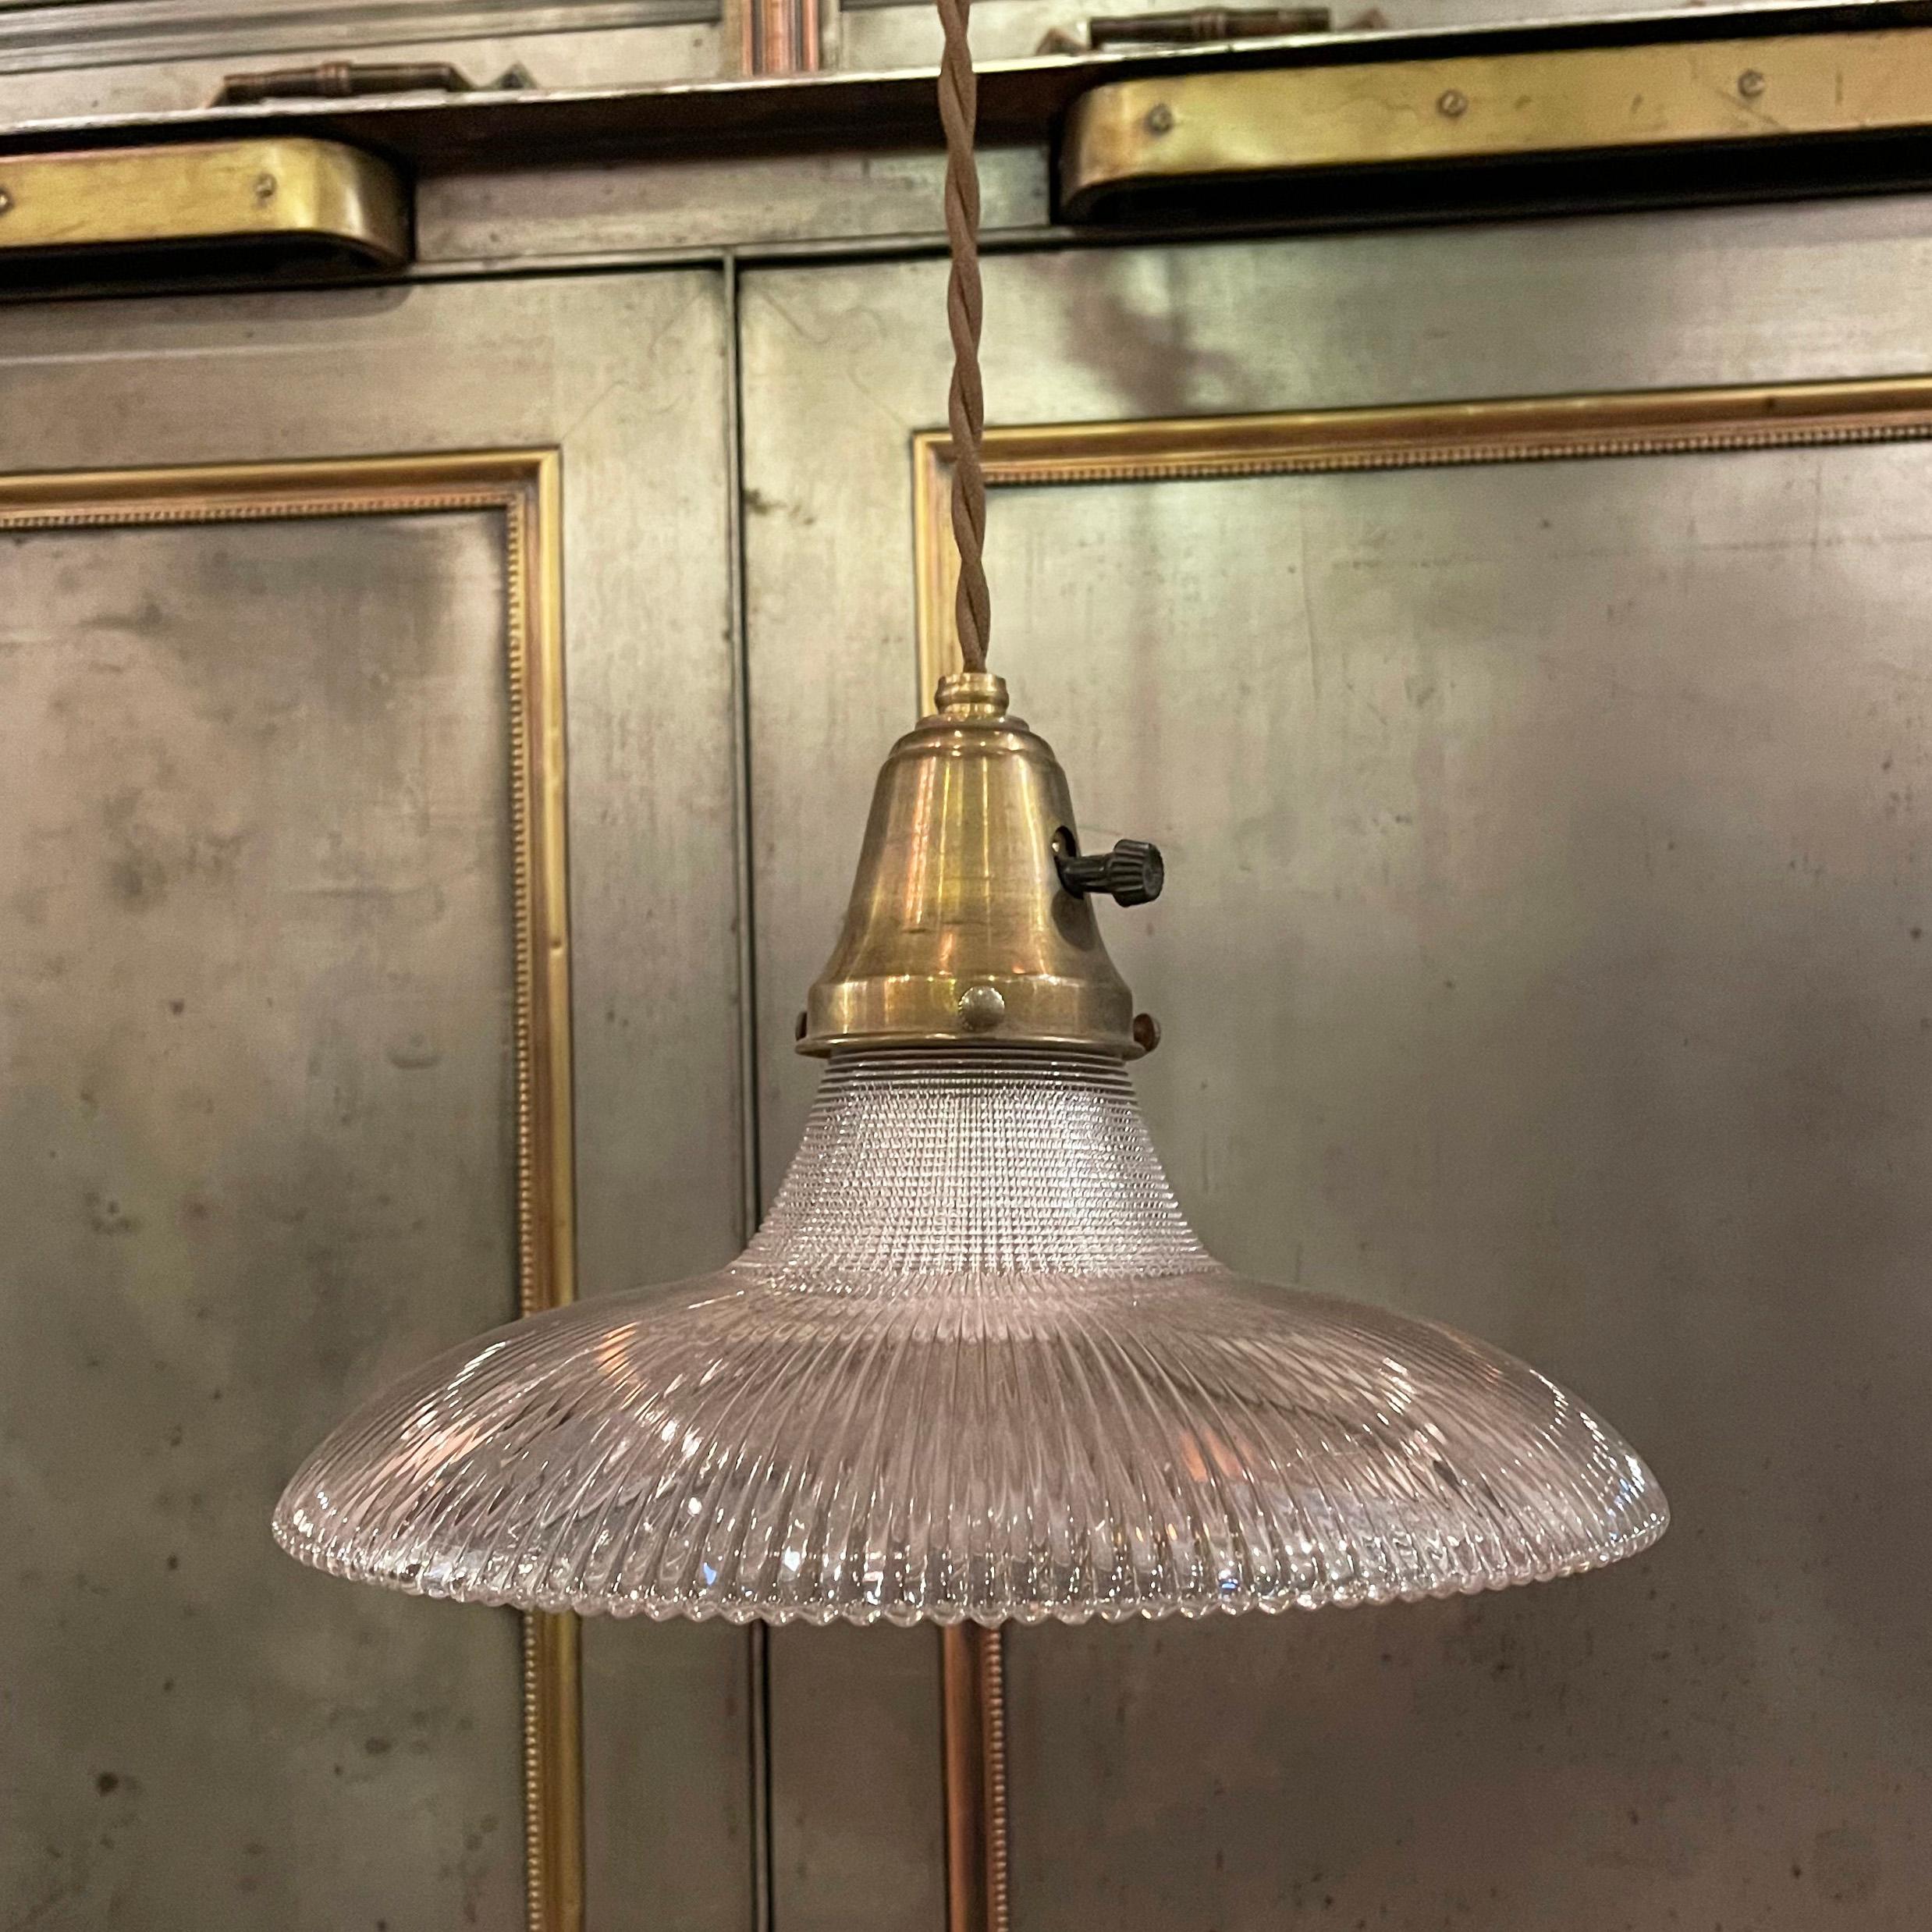 Early 20th century, industrial pendant light with a curved disc, prismatic Holophane glass shade and a brass paddle switch fitter is newly wired with 48 inches of brown braided cloth cord.